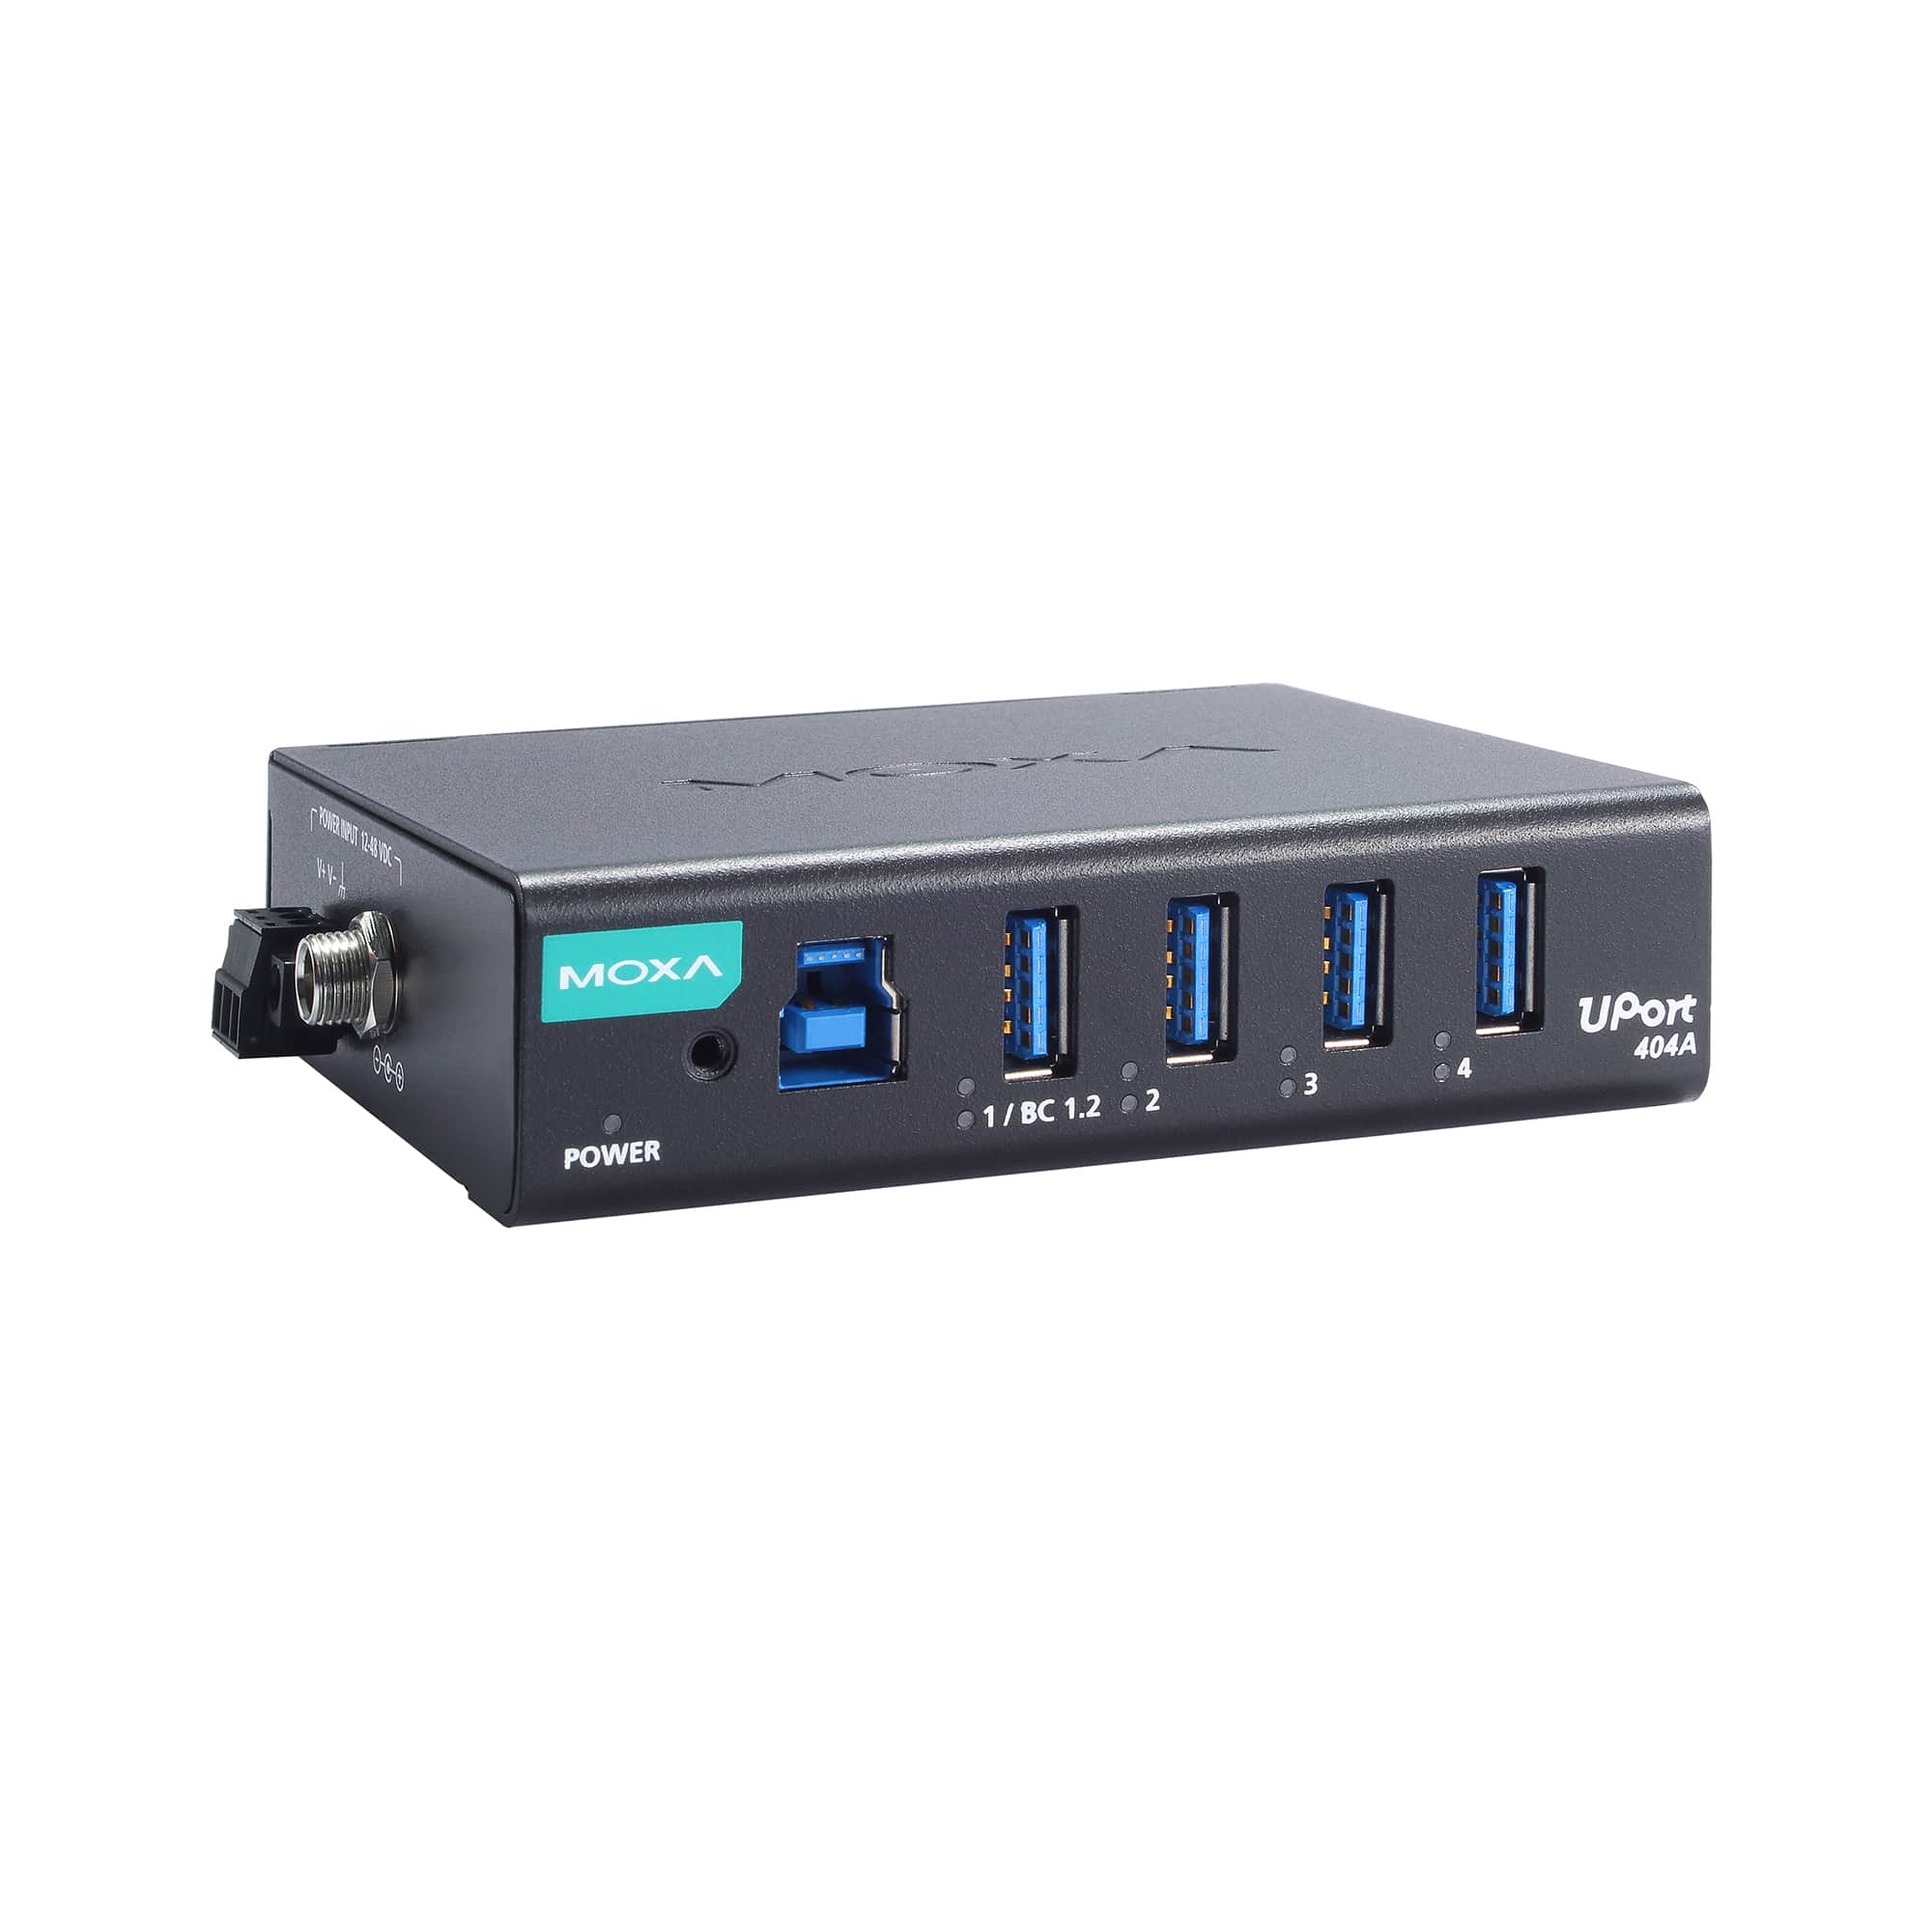  USB UPort 404A-T